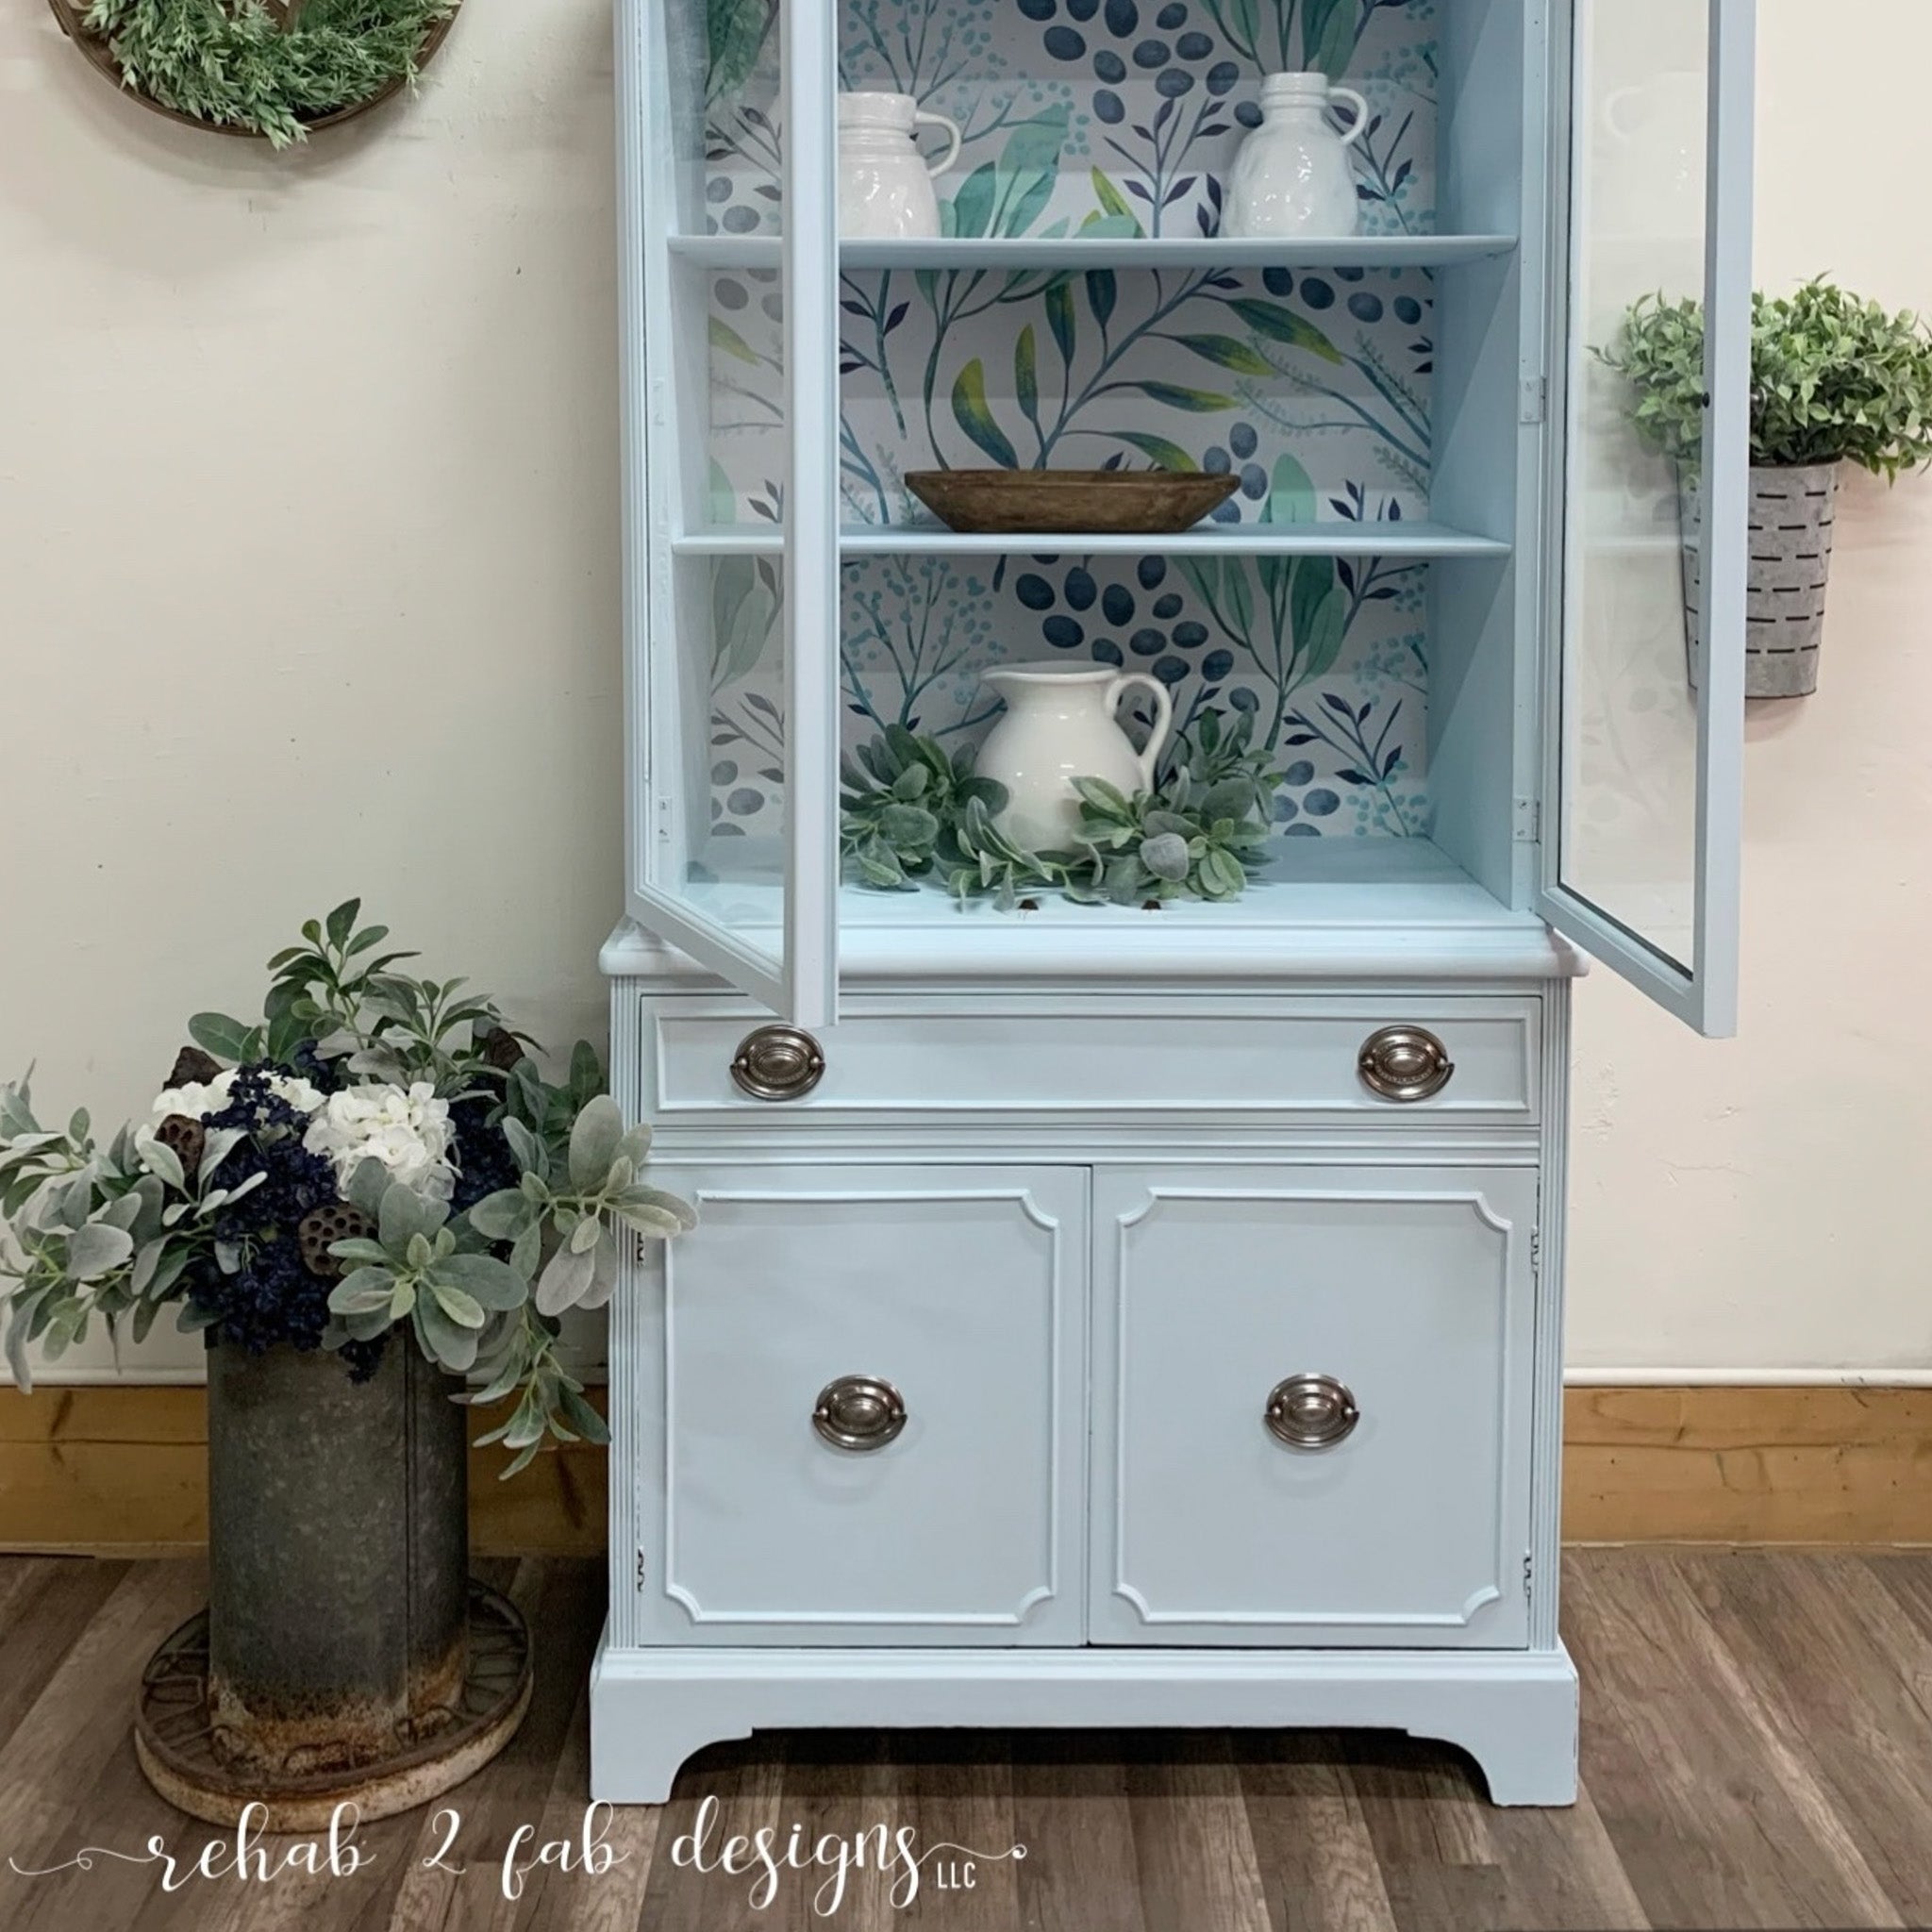 A vintage hutch refurbished by Rehab 2 Fab Designs is painted in Dixie Belle's Haint Blue chalk mineral paint.